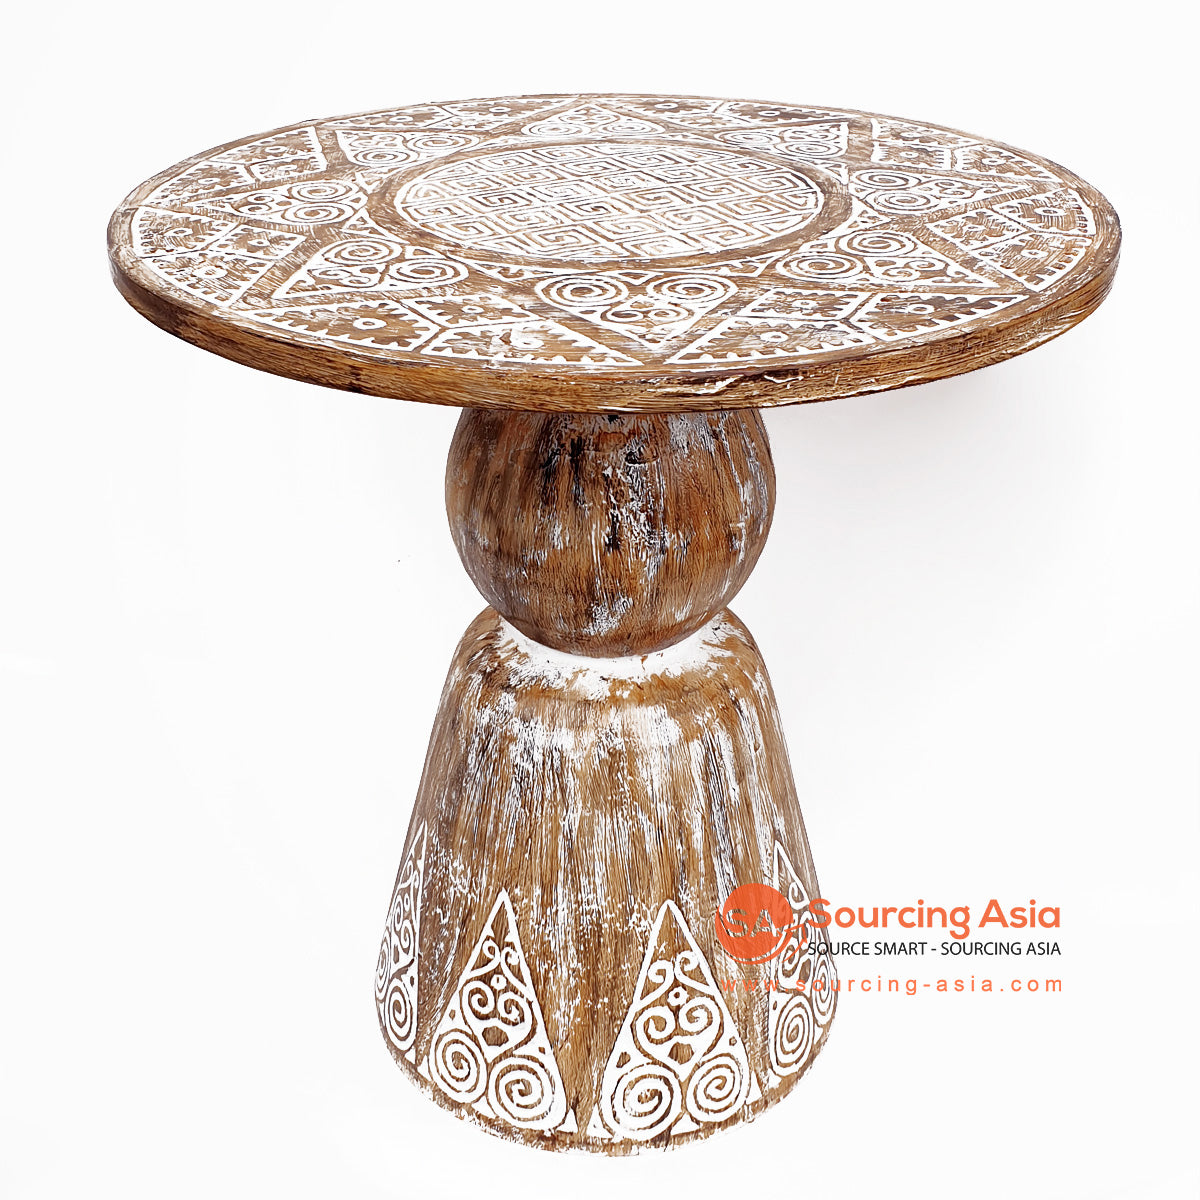 DGPC041 BROWN WASH SUAR WOOD TRIBAL CARVED ROUND TABLE